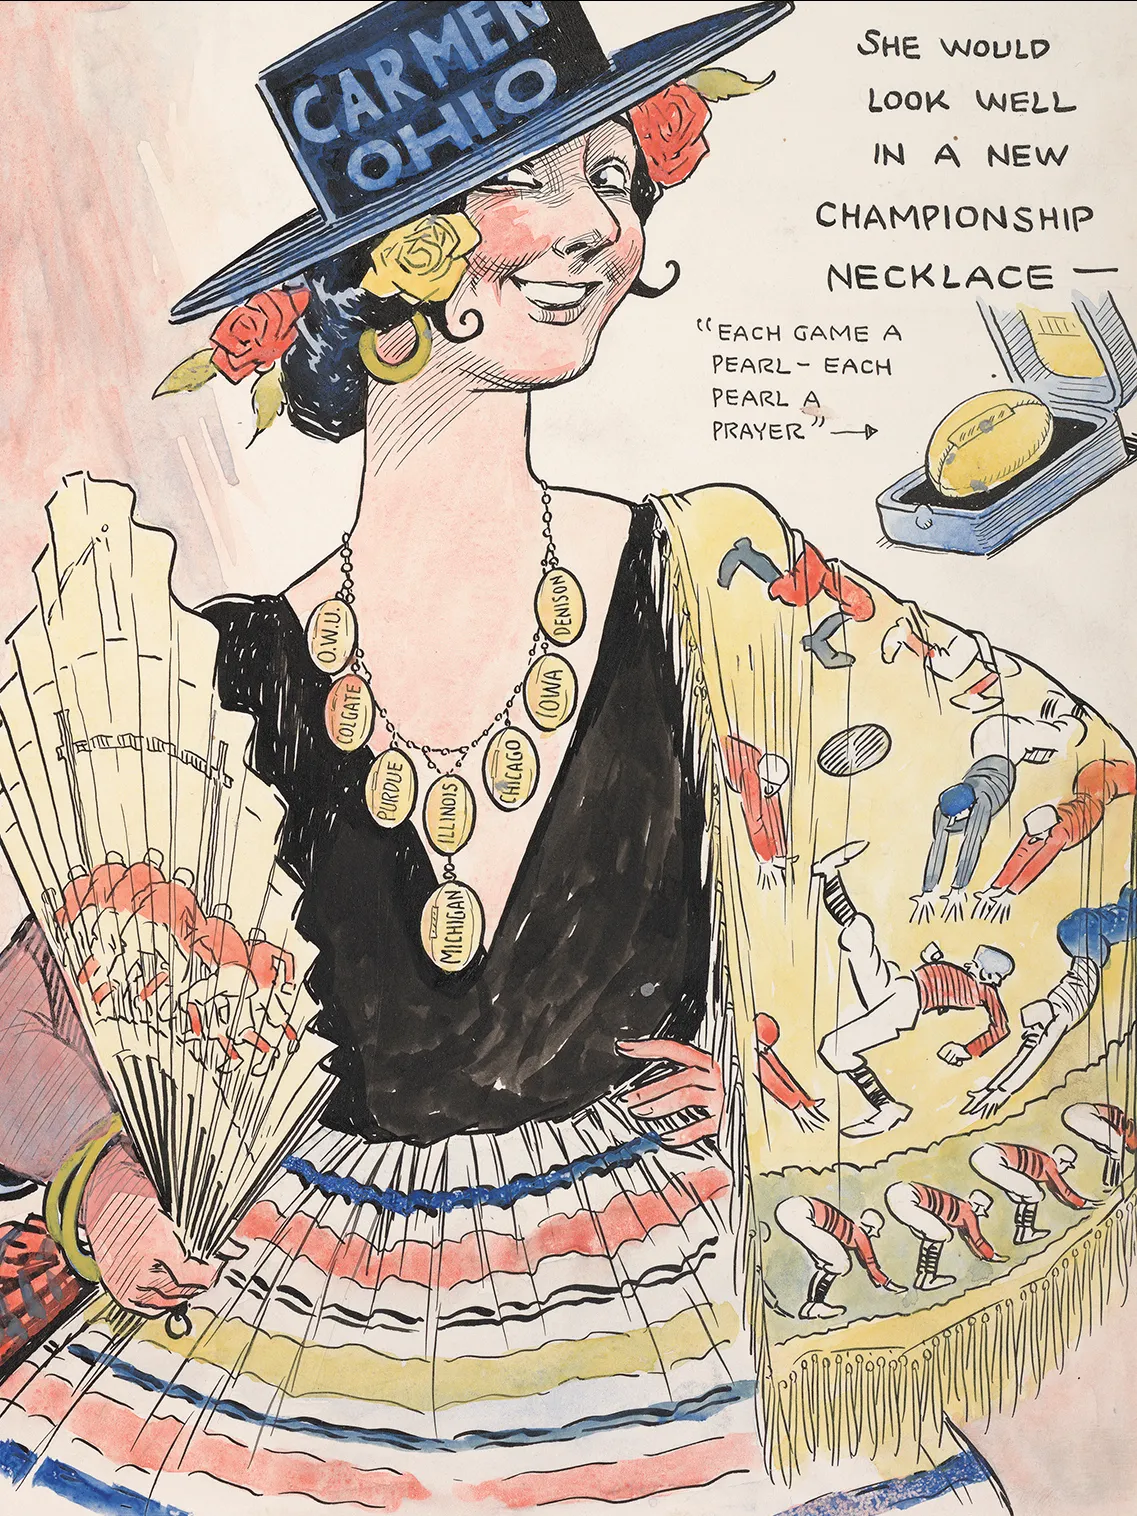 A woman wearing a wide brimmed hat, roses in her hair and a low-cut Spanish-flavored dress smiles at the viewer as if flirting. Her hat says Carmen Ohio. She holds a large fan and wears a golden necklace with 8 dangling footballs. Text next to her says: She would look well in a new championship necklace. Each game a pearl — each pearl a prayer.